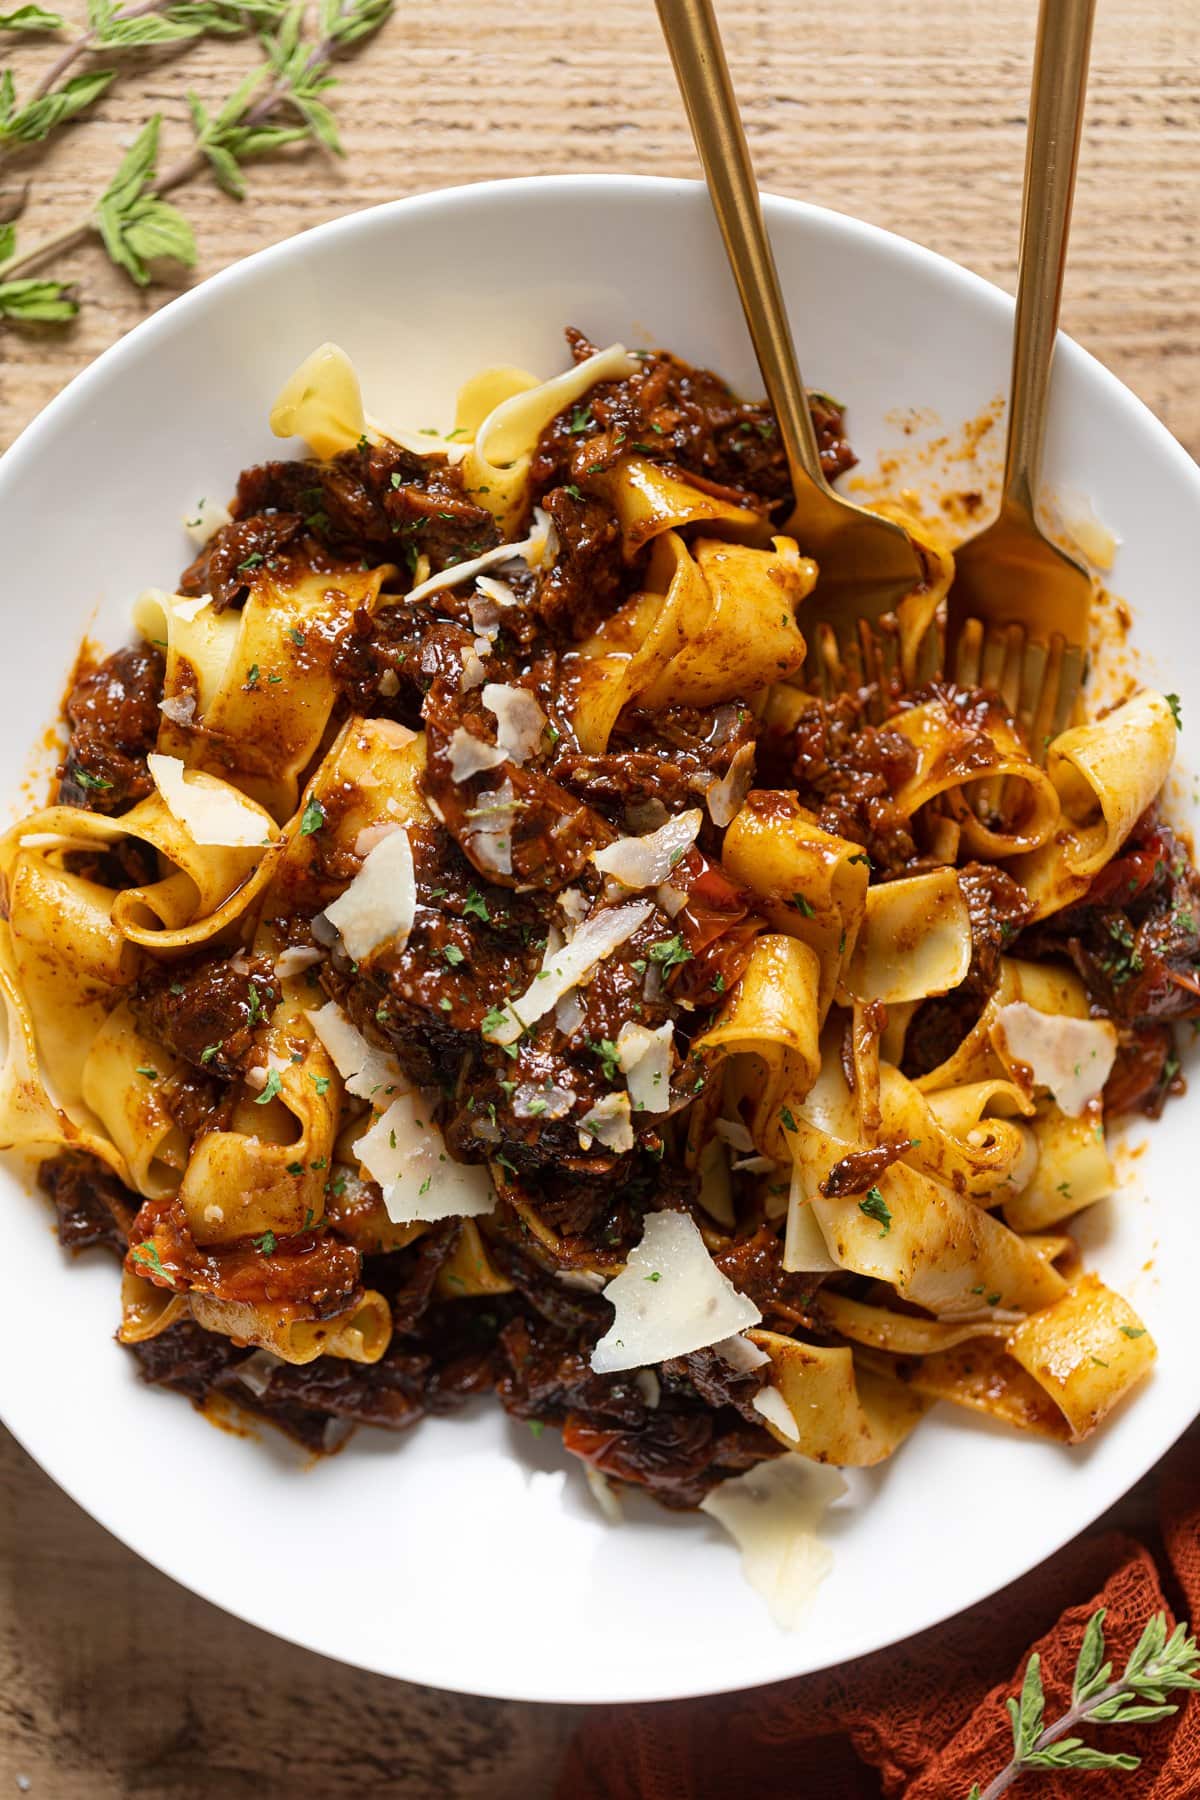 Plate of Braised Steak Ragu with Pappardelle with two forks